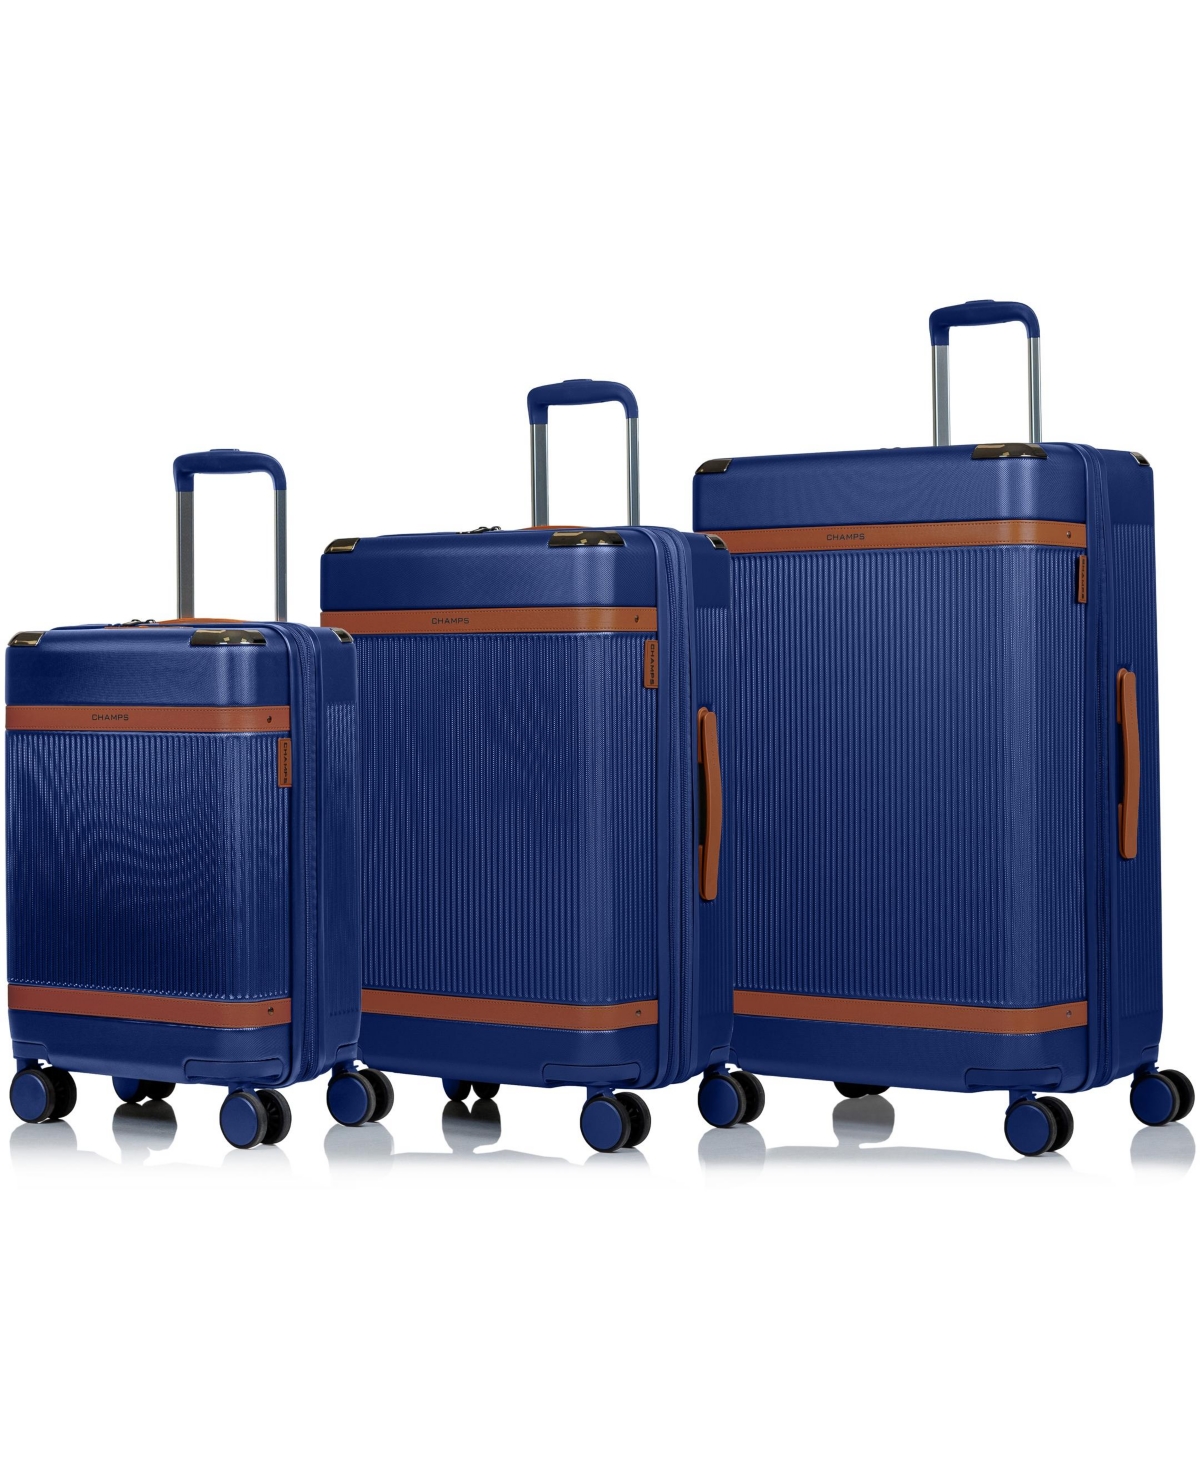 Champs 3-piece Vintage-like Air Hardside Luggage Set In Navy